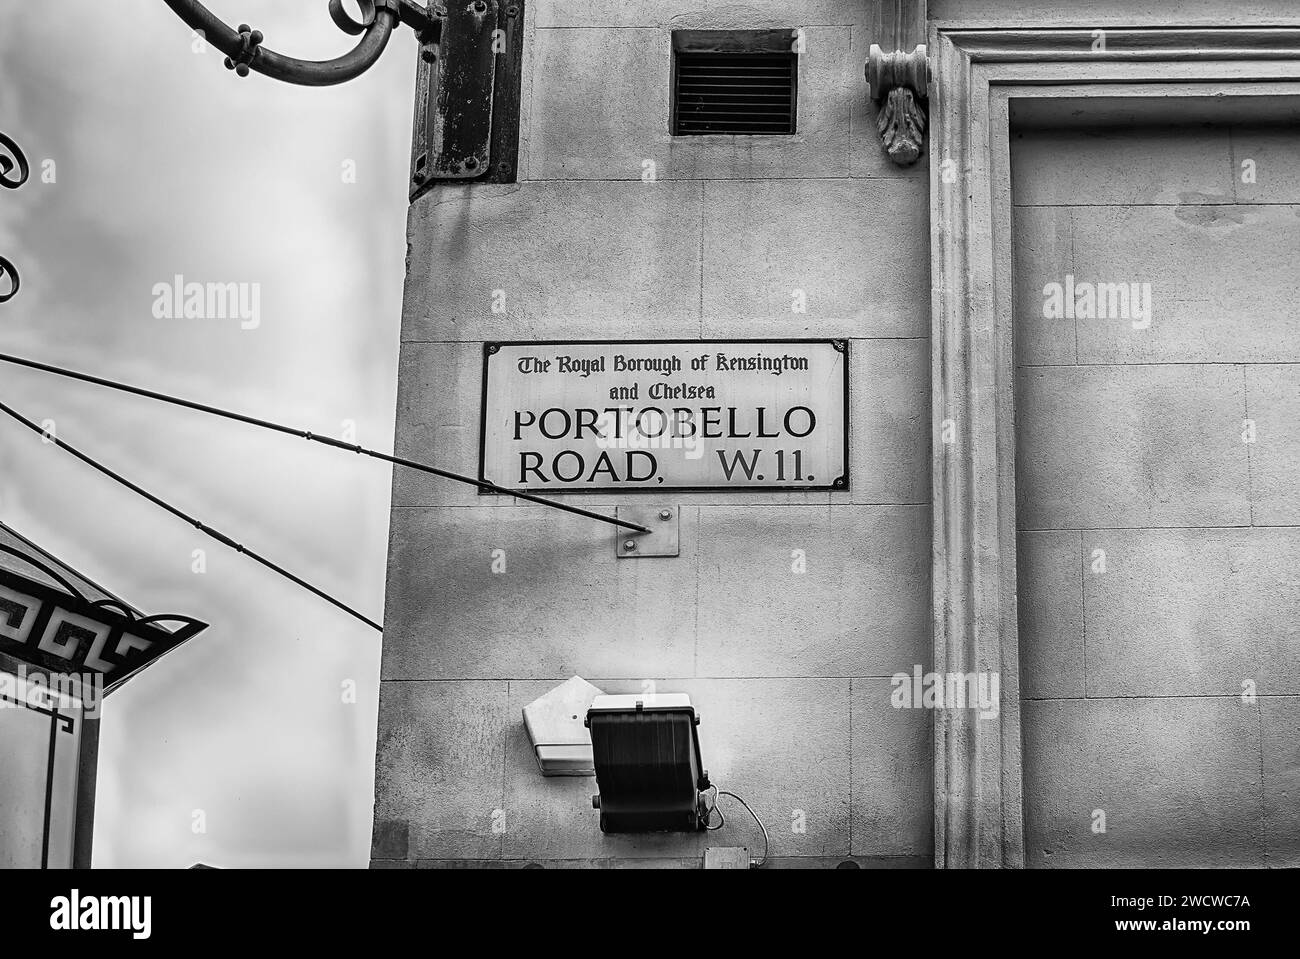 Portobello Road sign in the picturesque district of Notting Hill district, London, UK Stock Photo